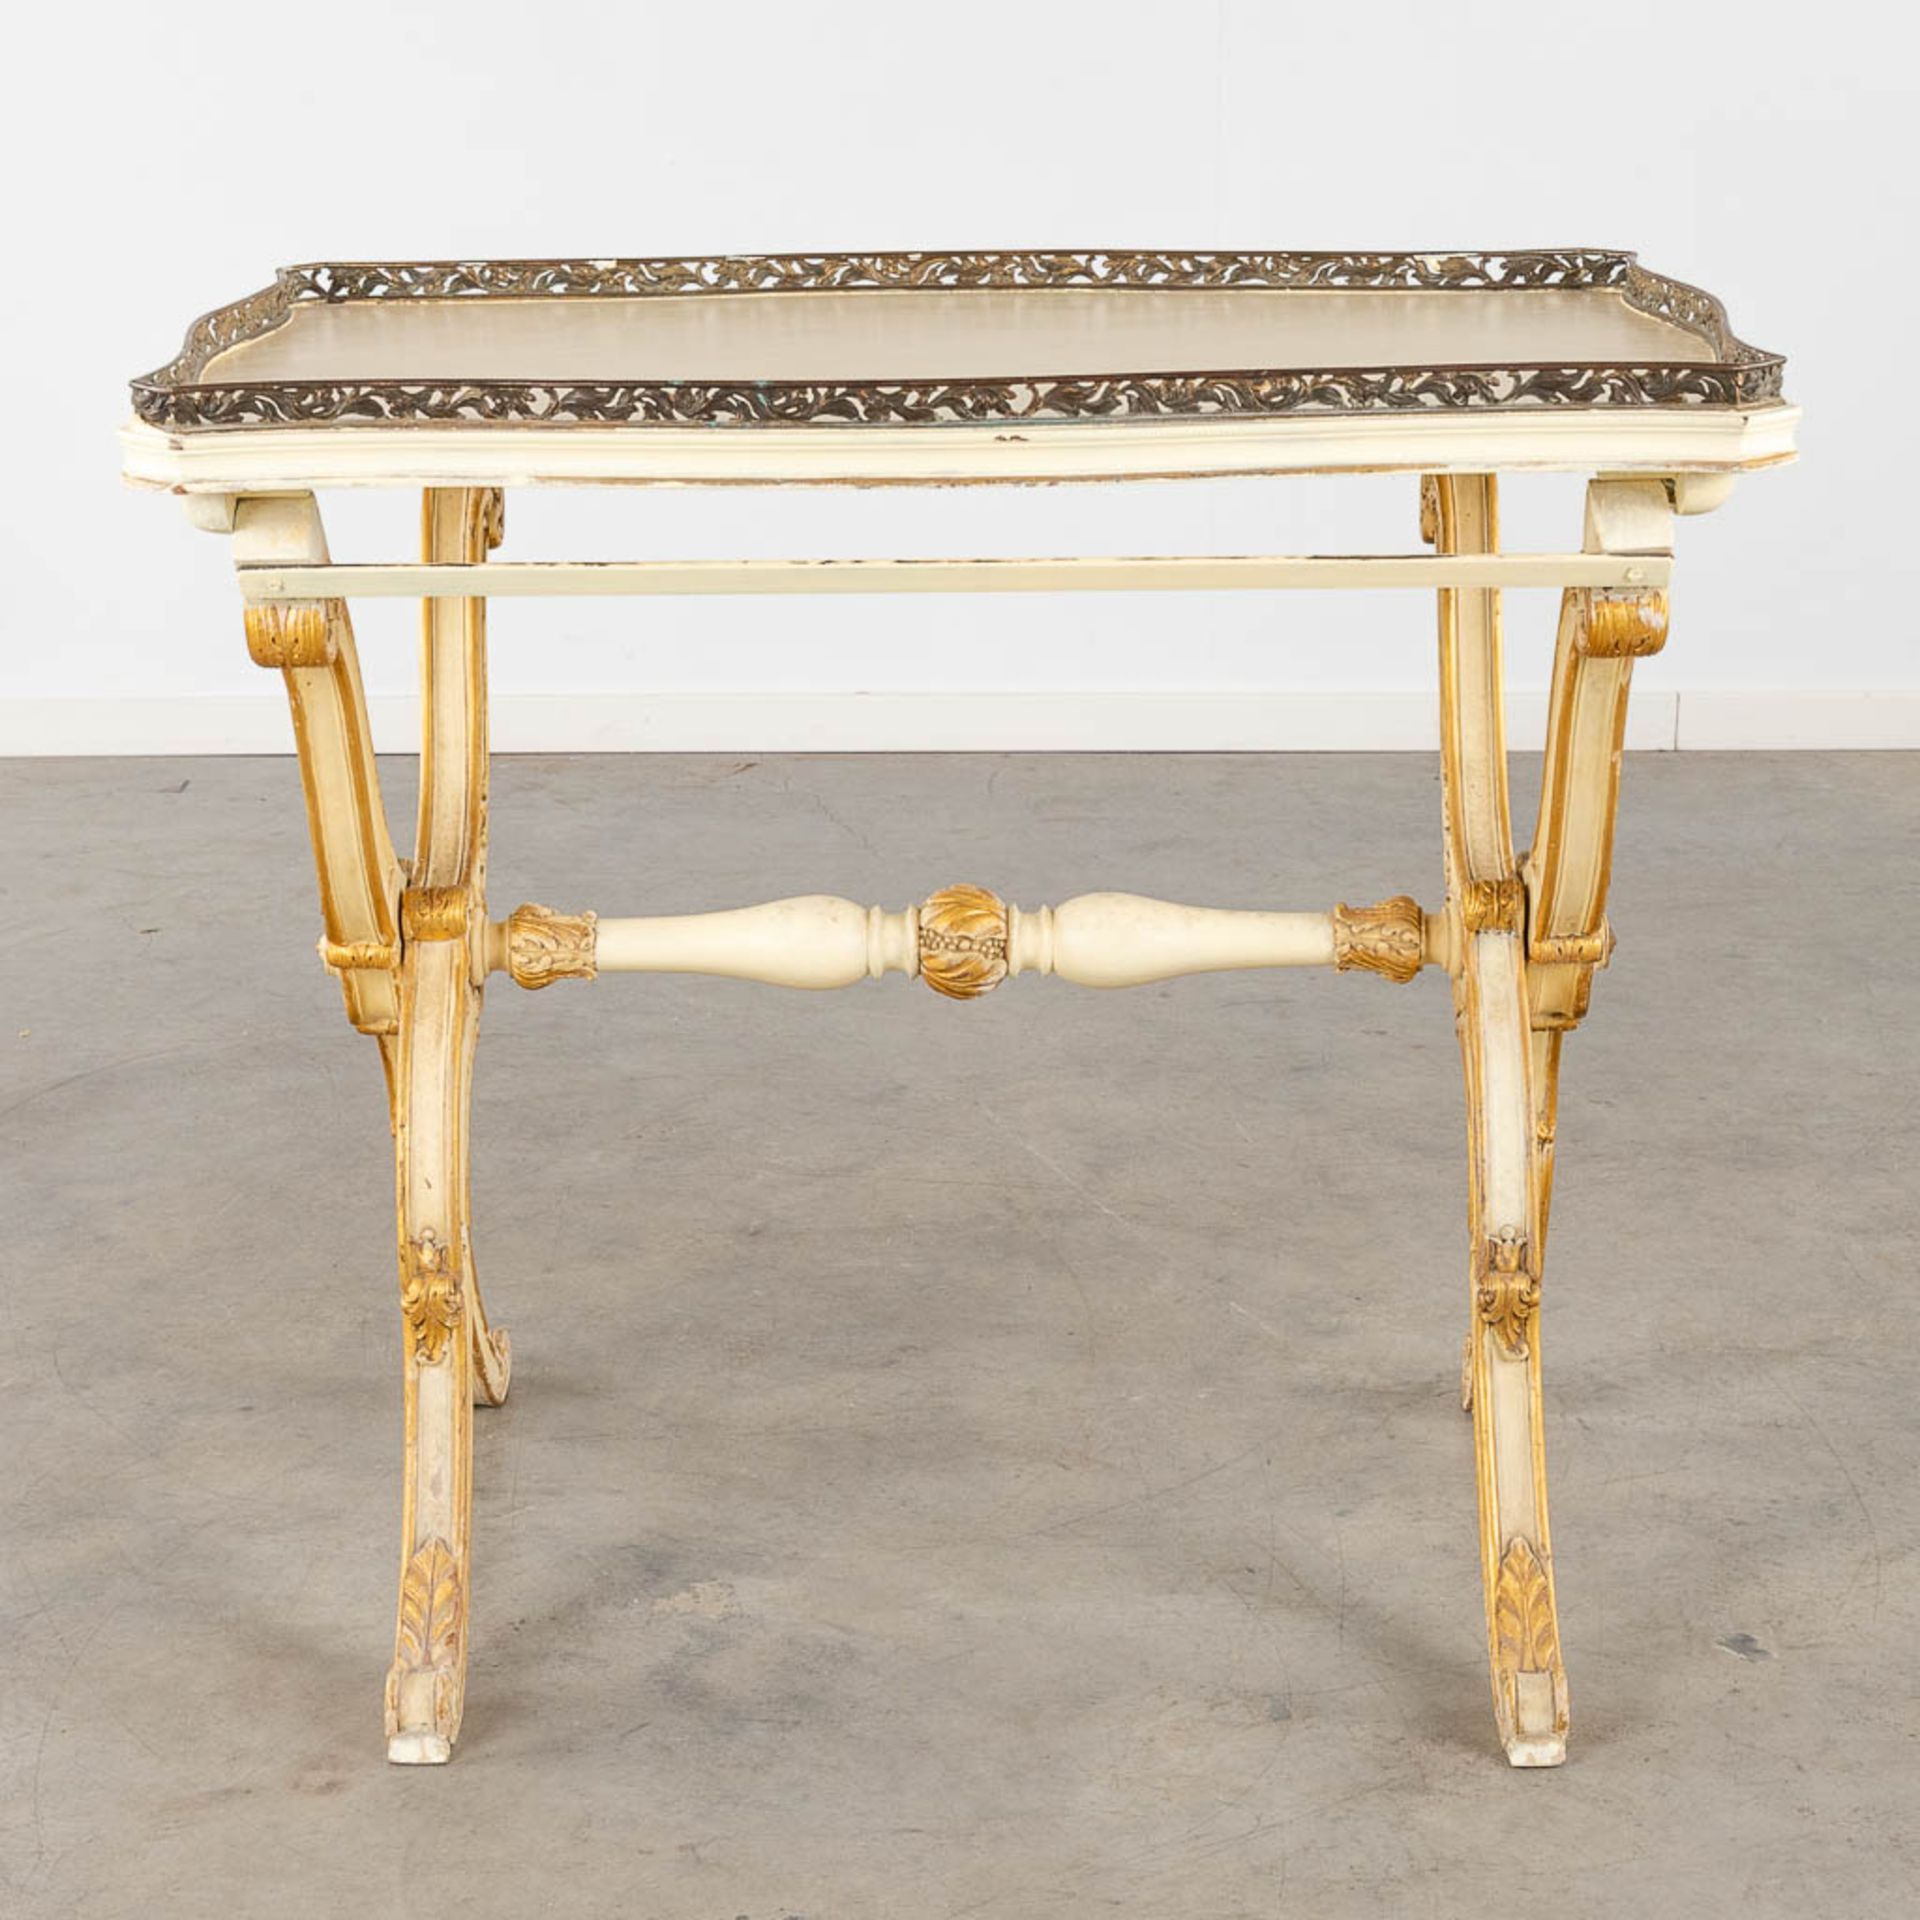 A serving table with bronze gallery, Italian style wood-sculptures. 19th C. (L:60 x W:89 x H:79 cm) - Bild 3 aus 14